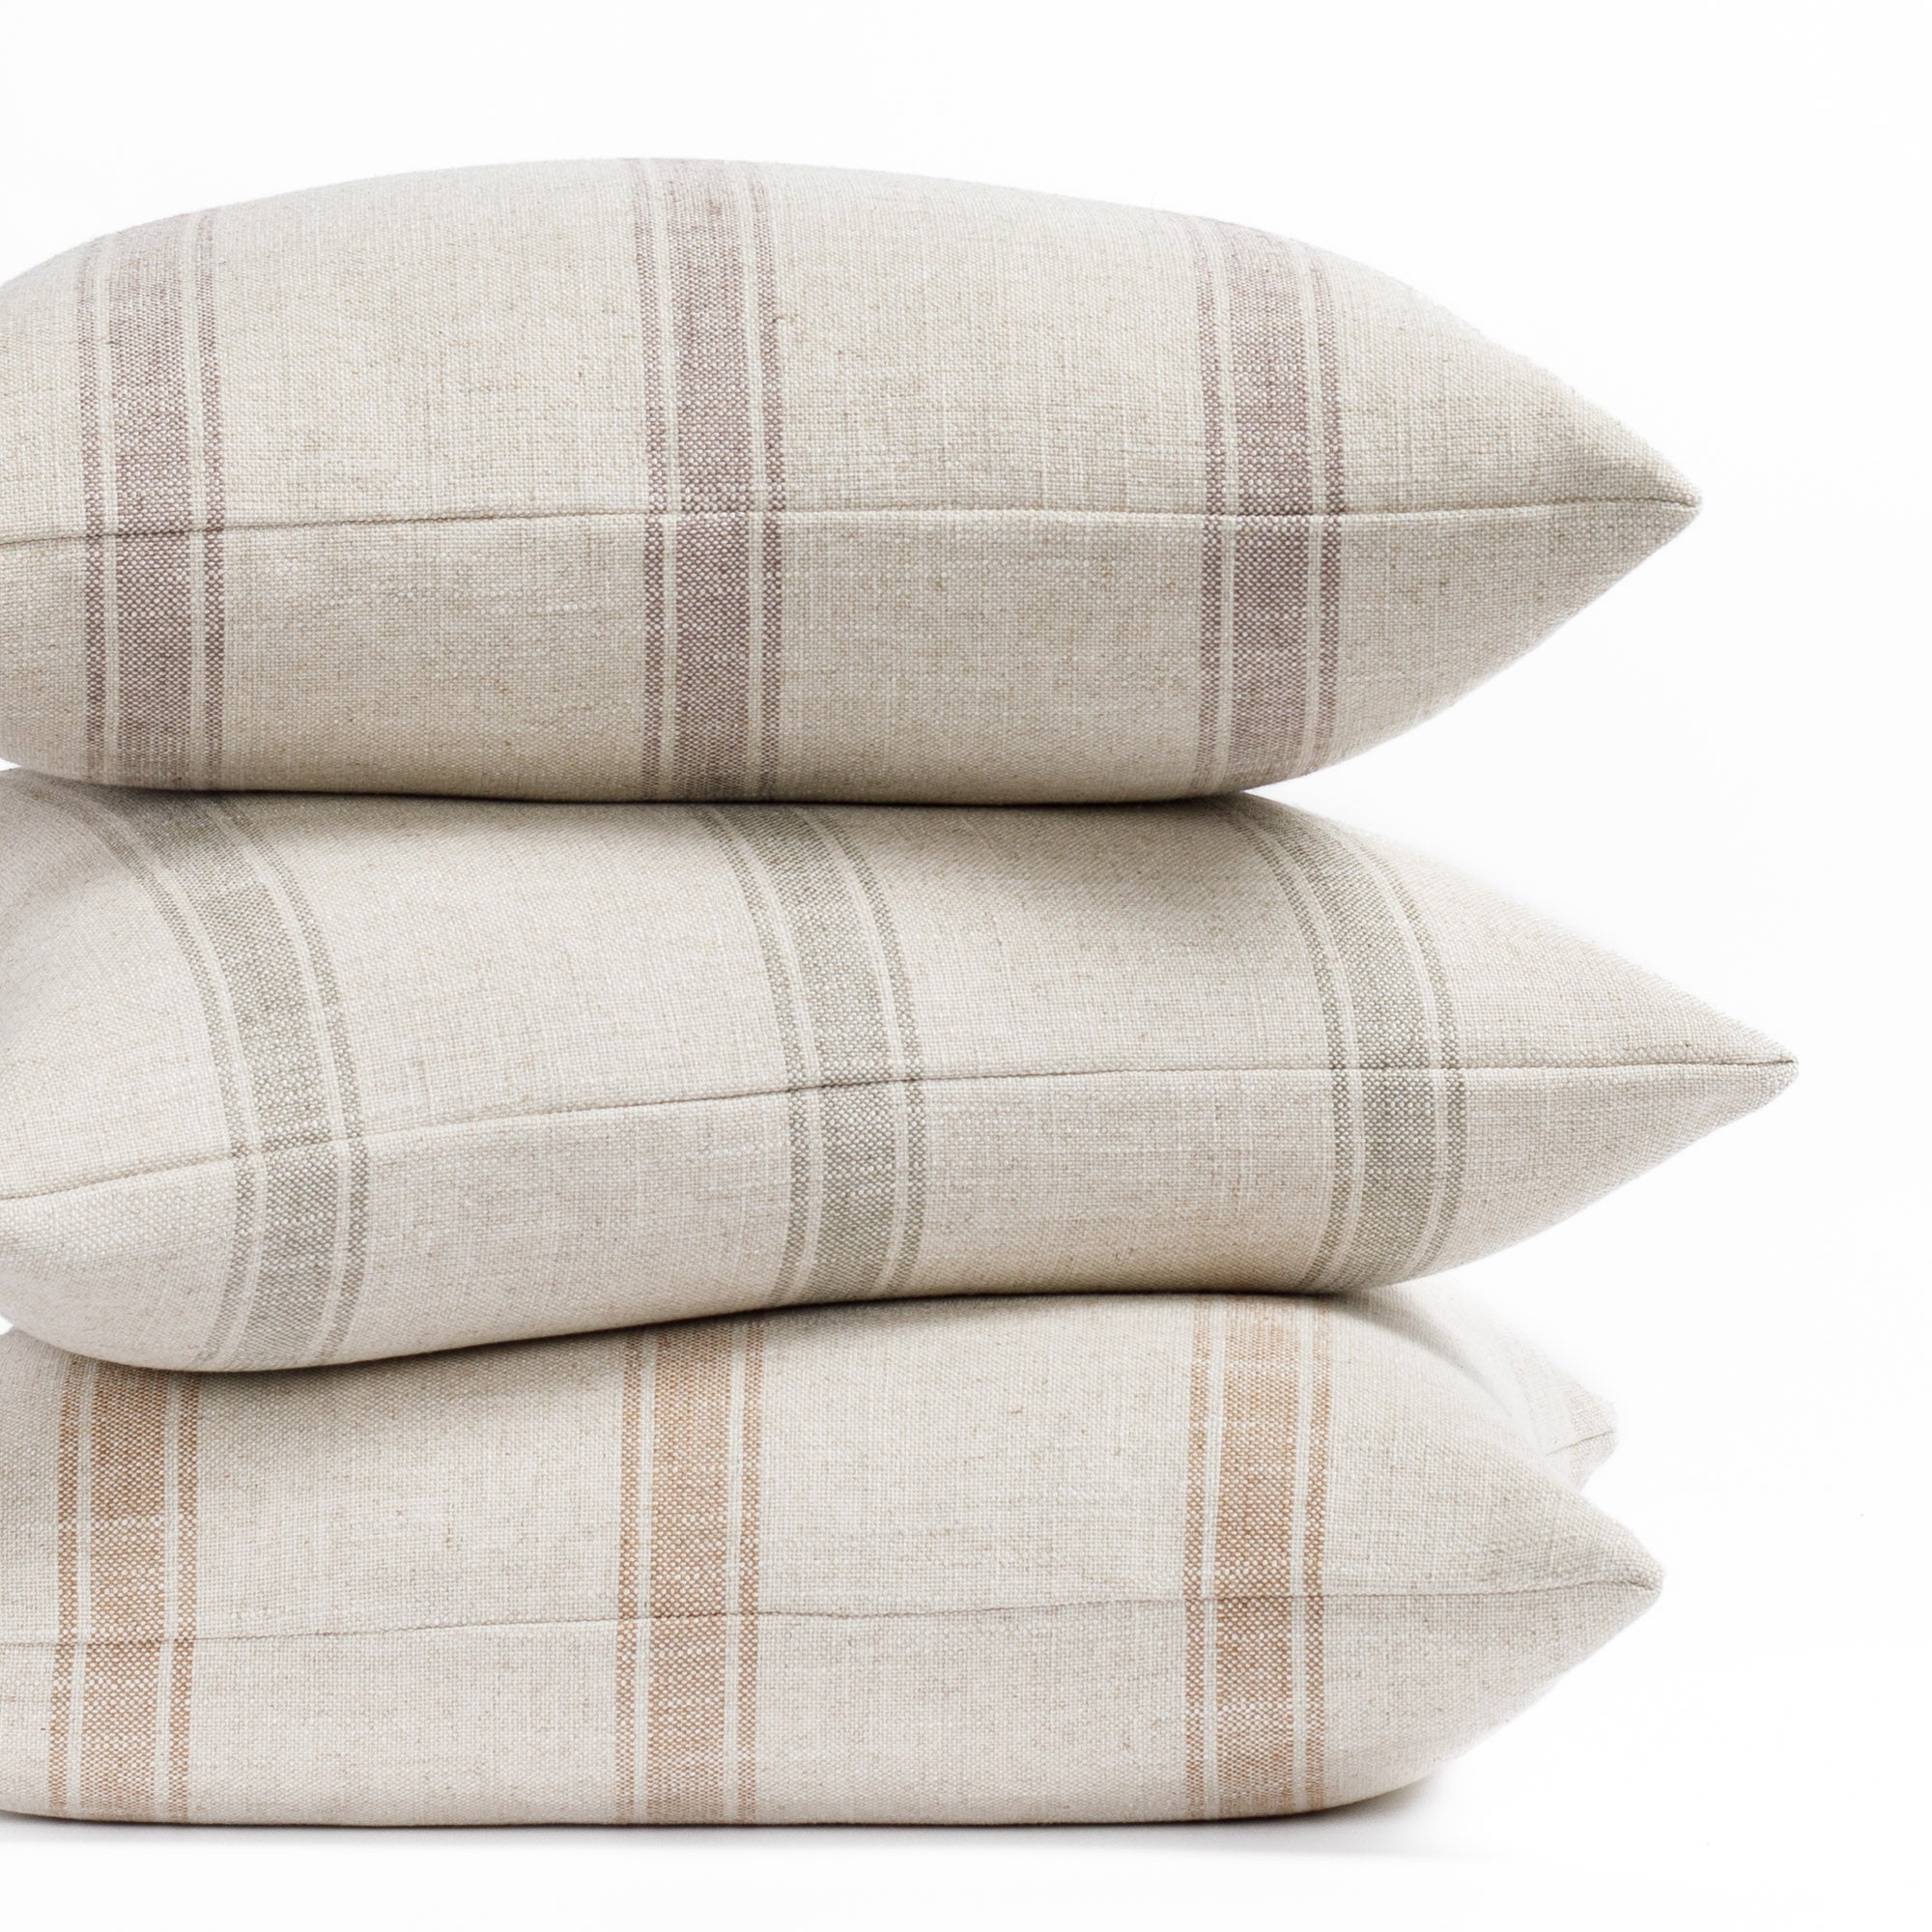 theo stripe pillows in mauve, rust and lake colorways